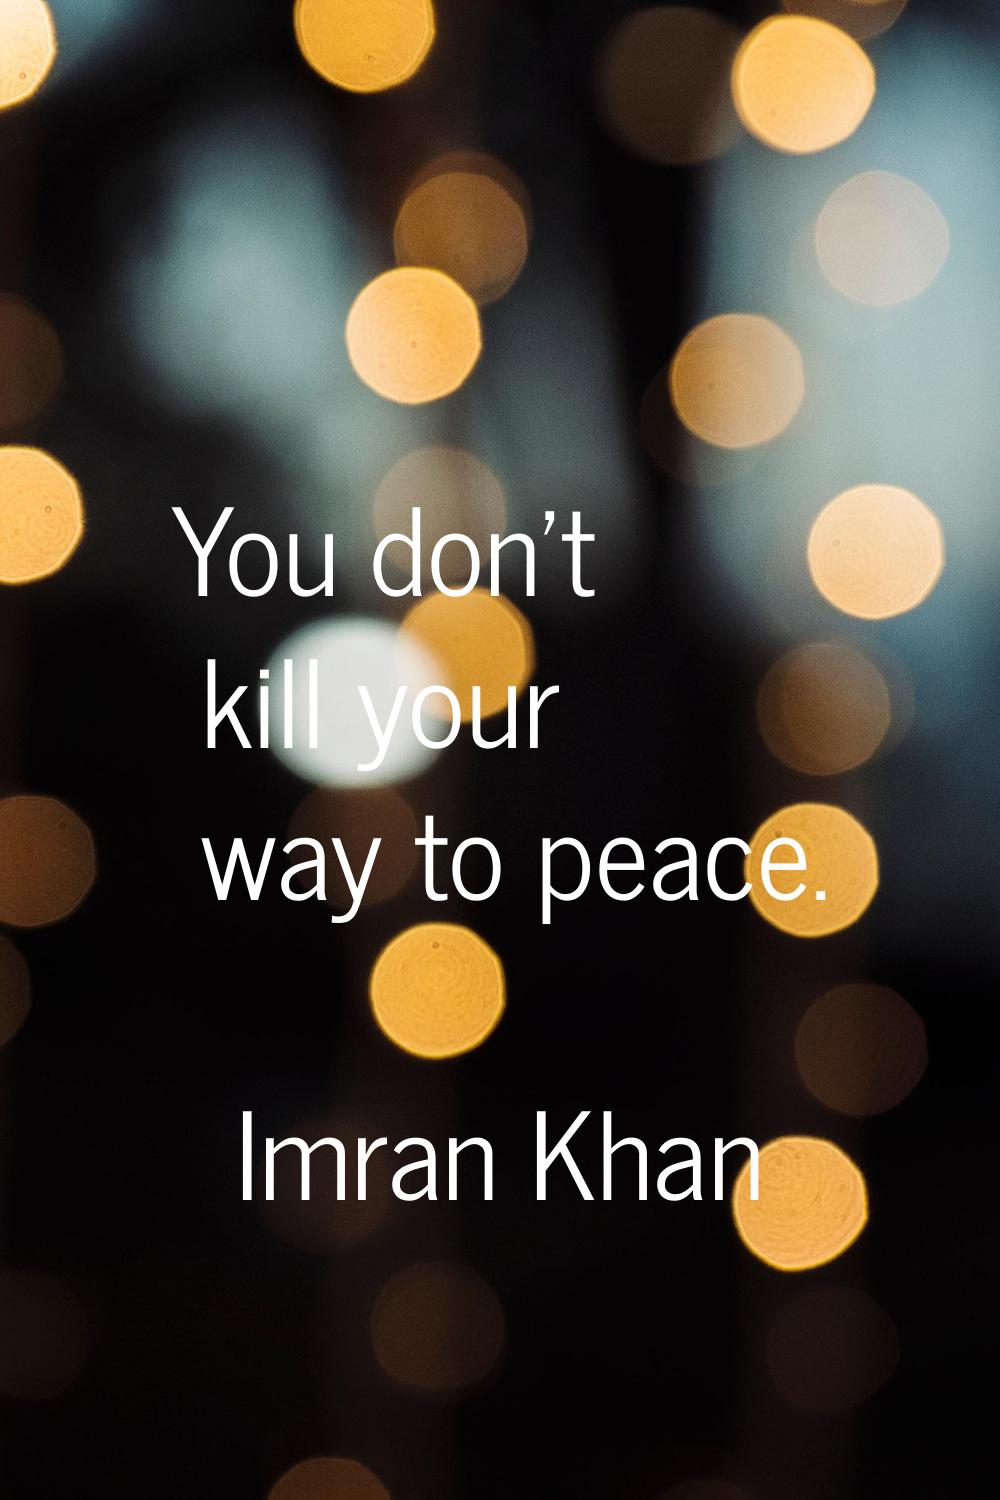 You don't kill your way to peace.